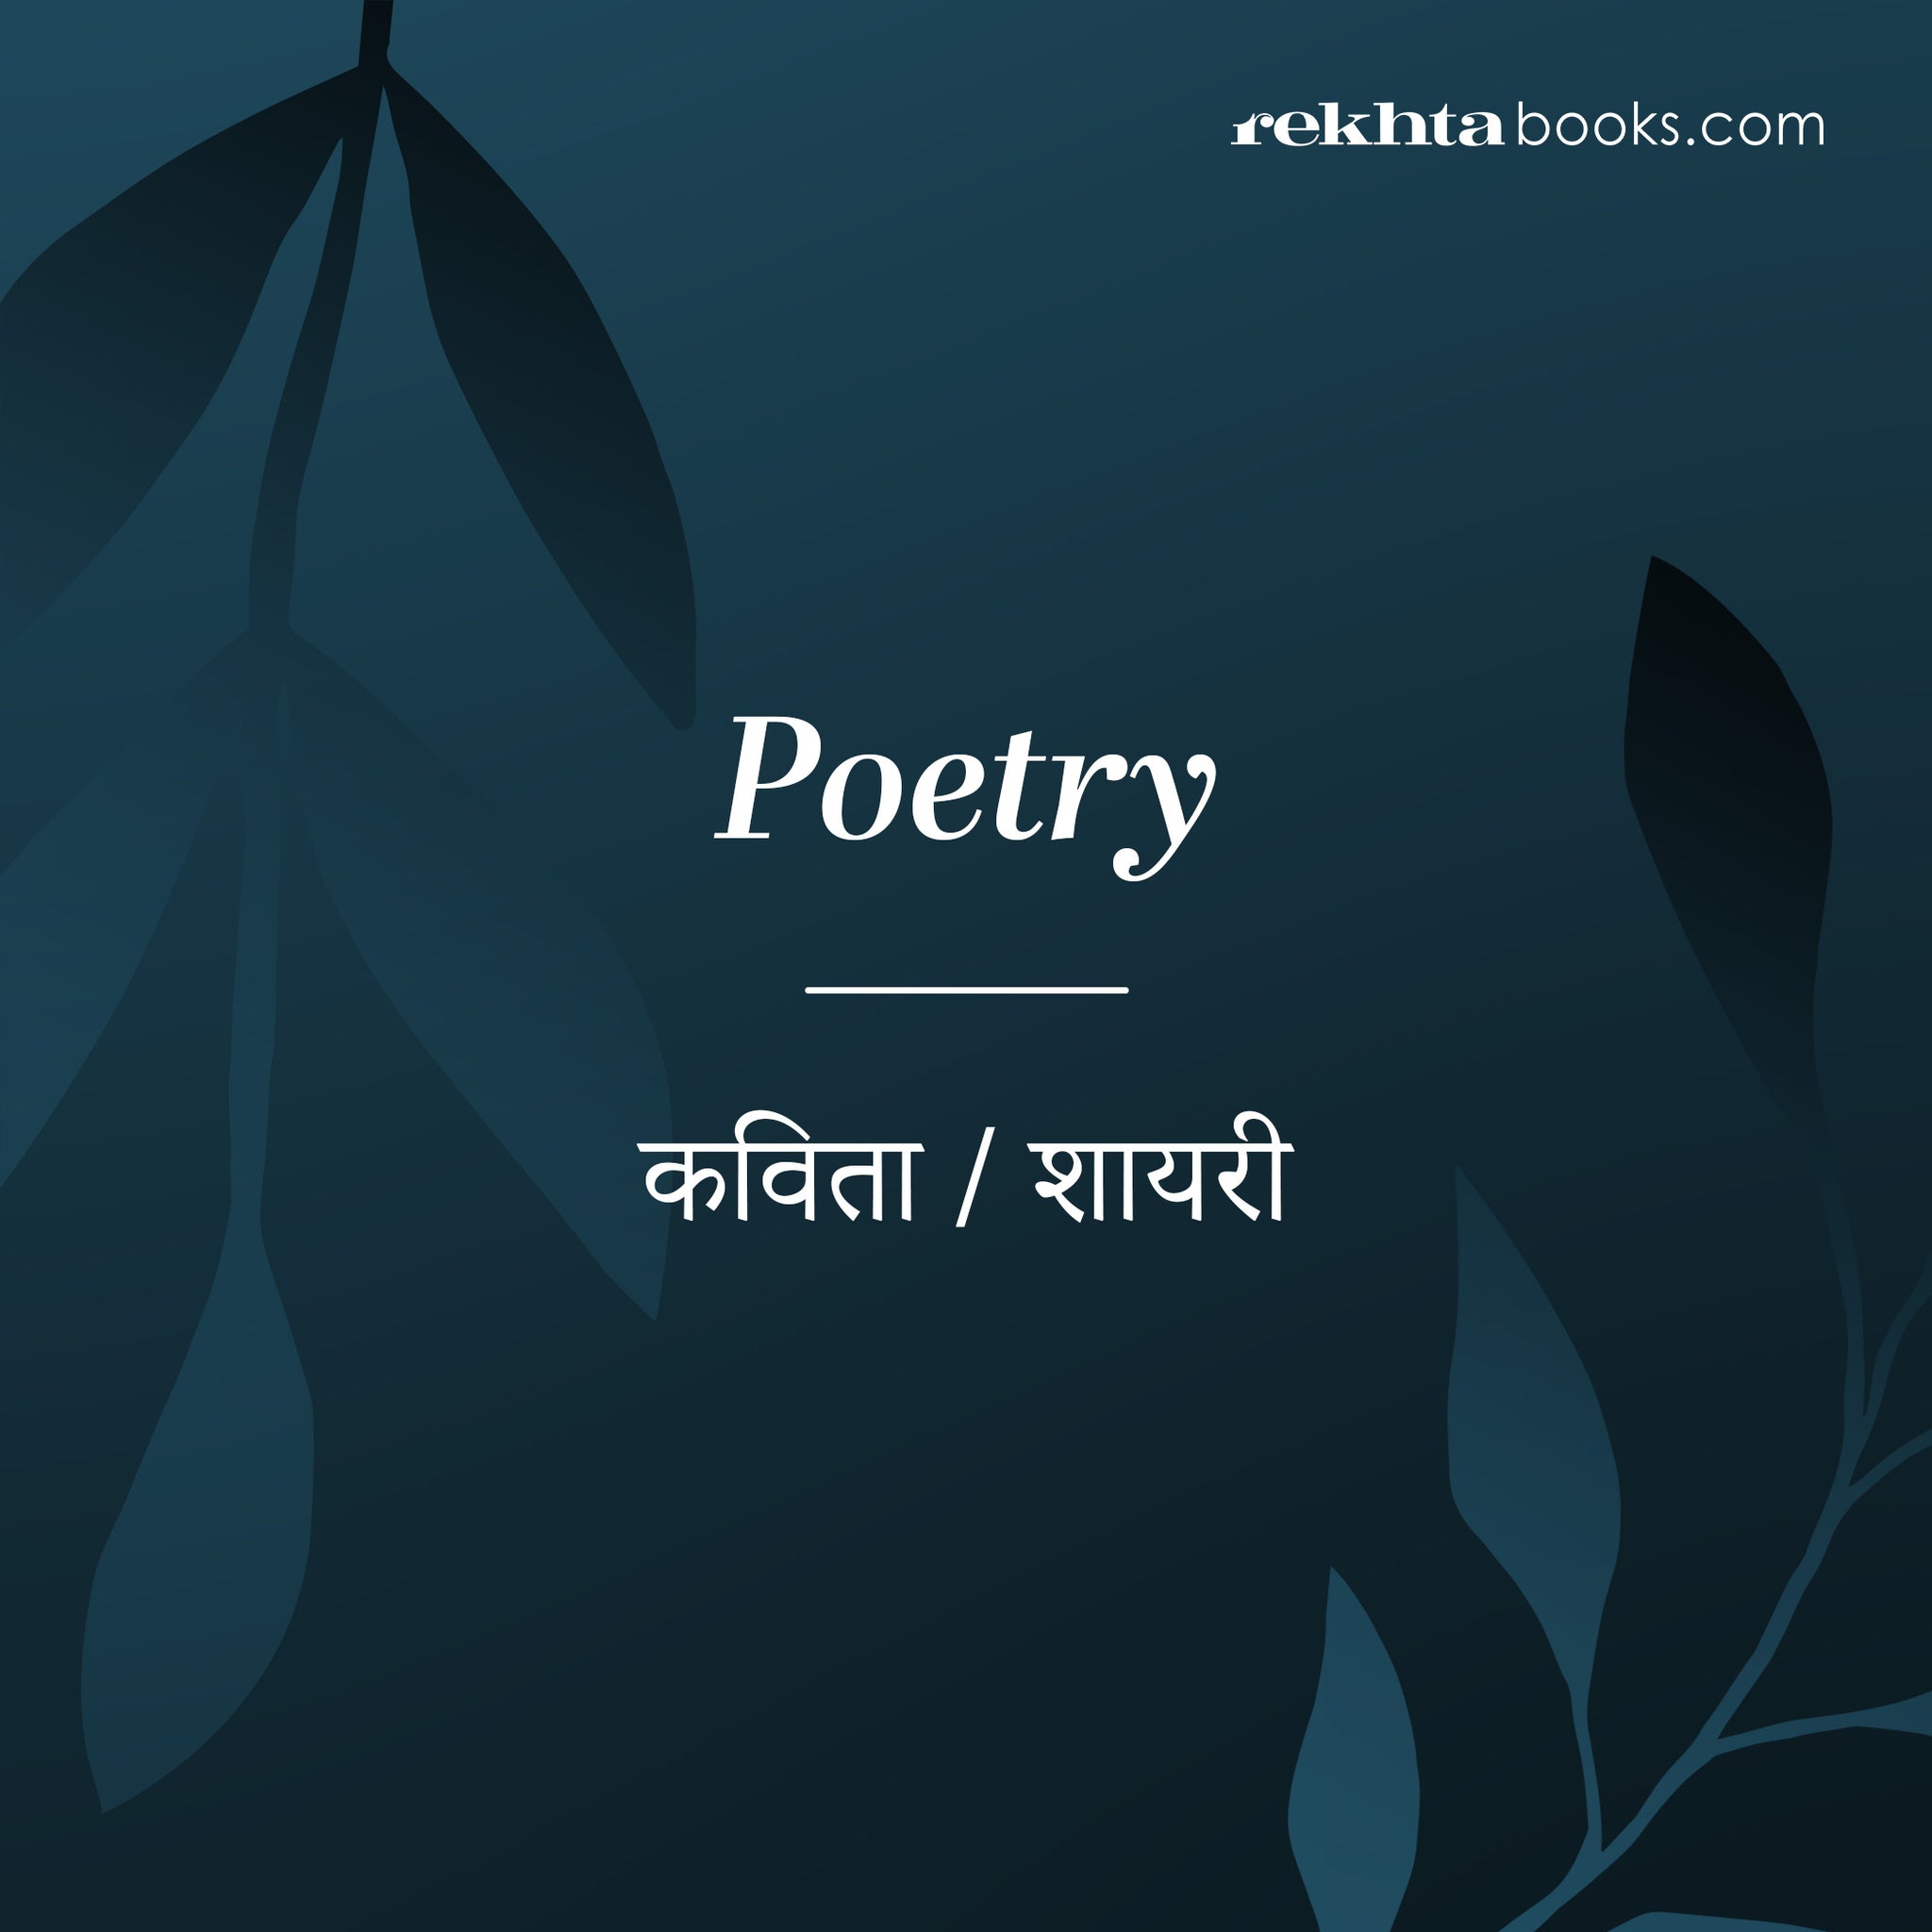 Books on Poetry